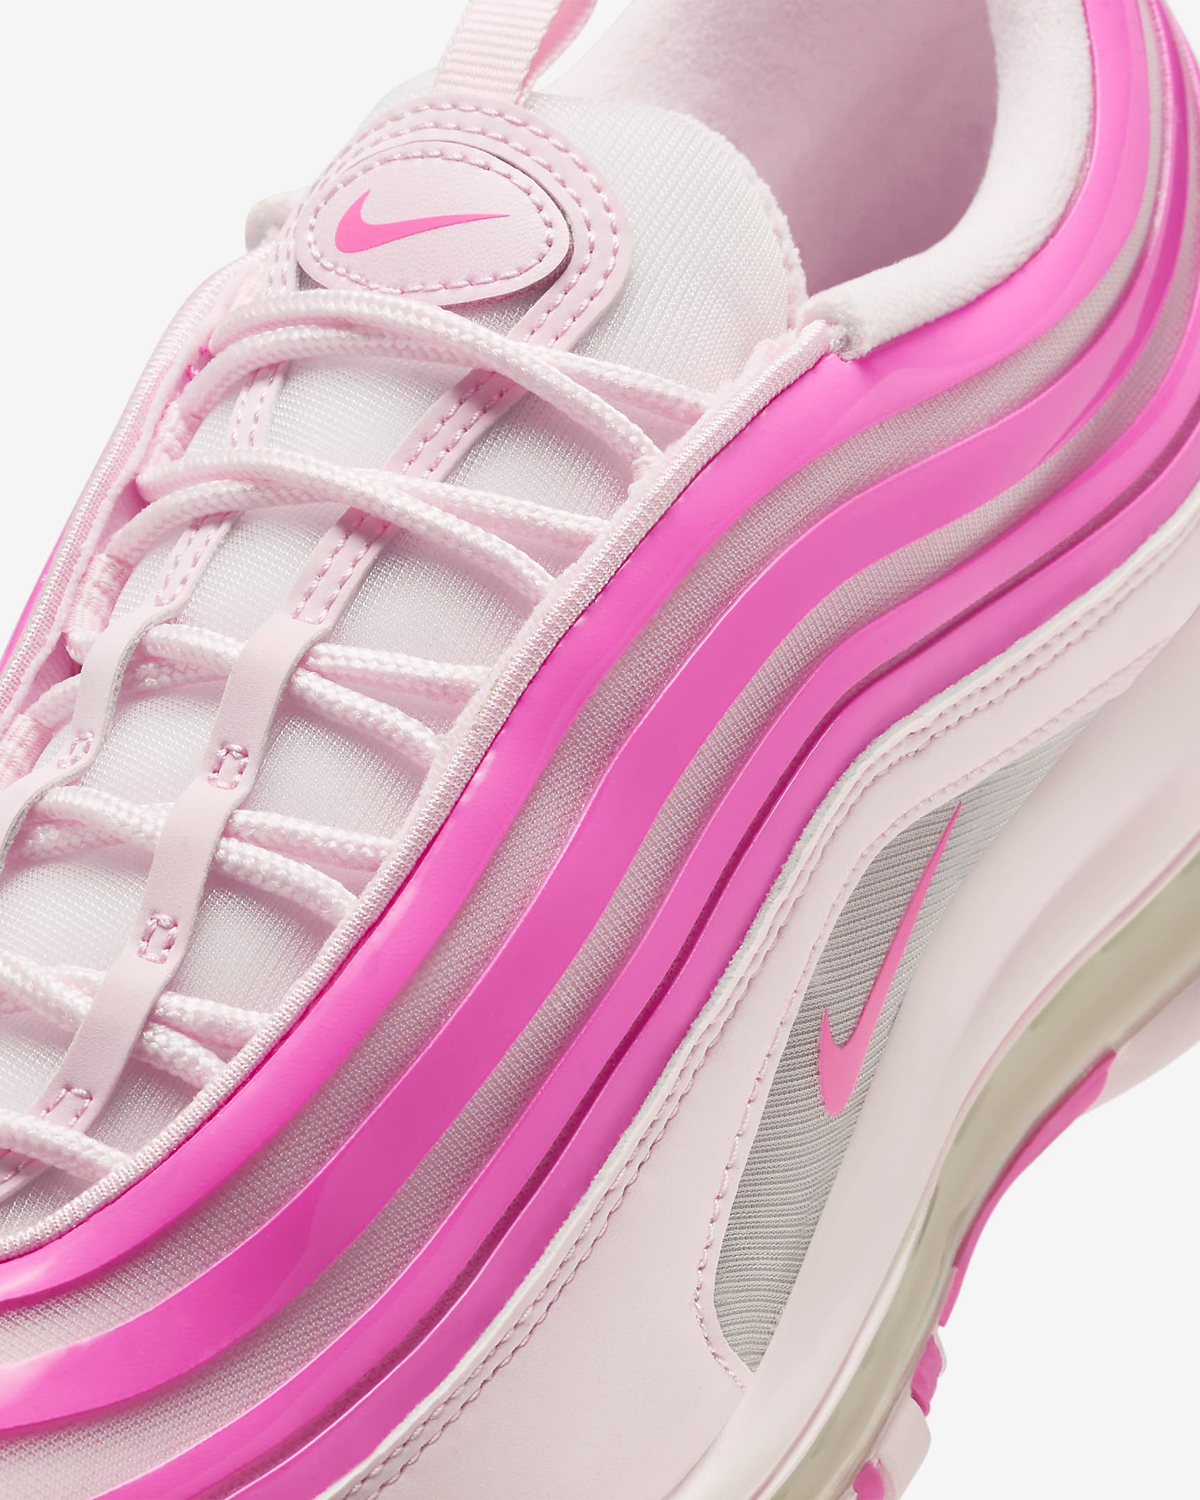 Nike Air Max 97 Pink Foam Playful Pink Release Date 7